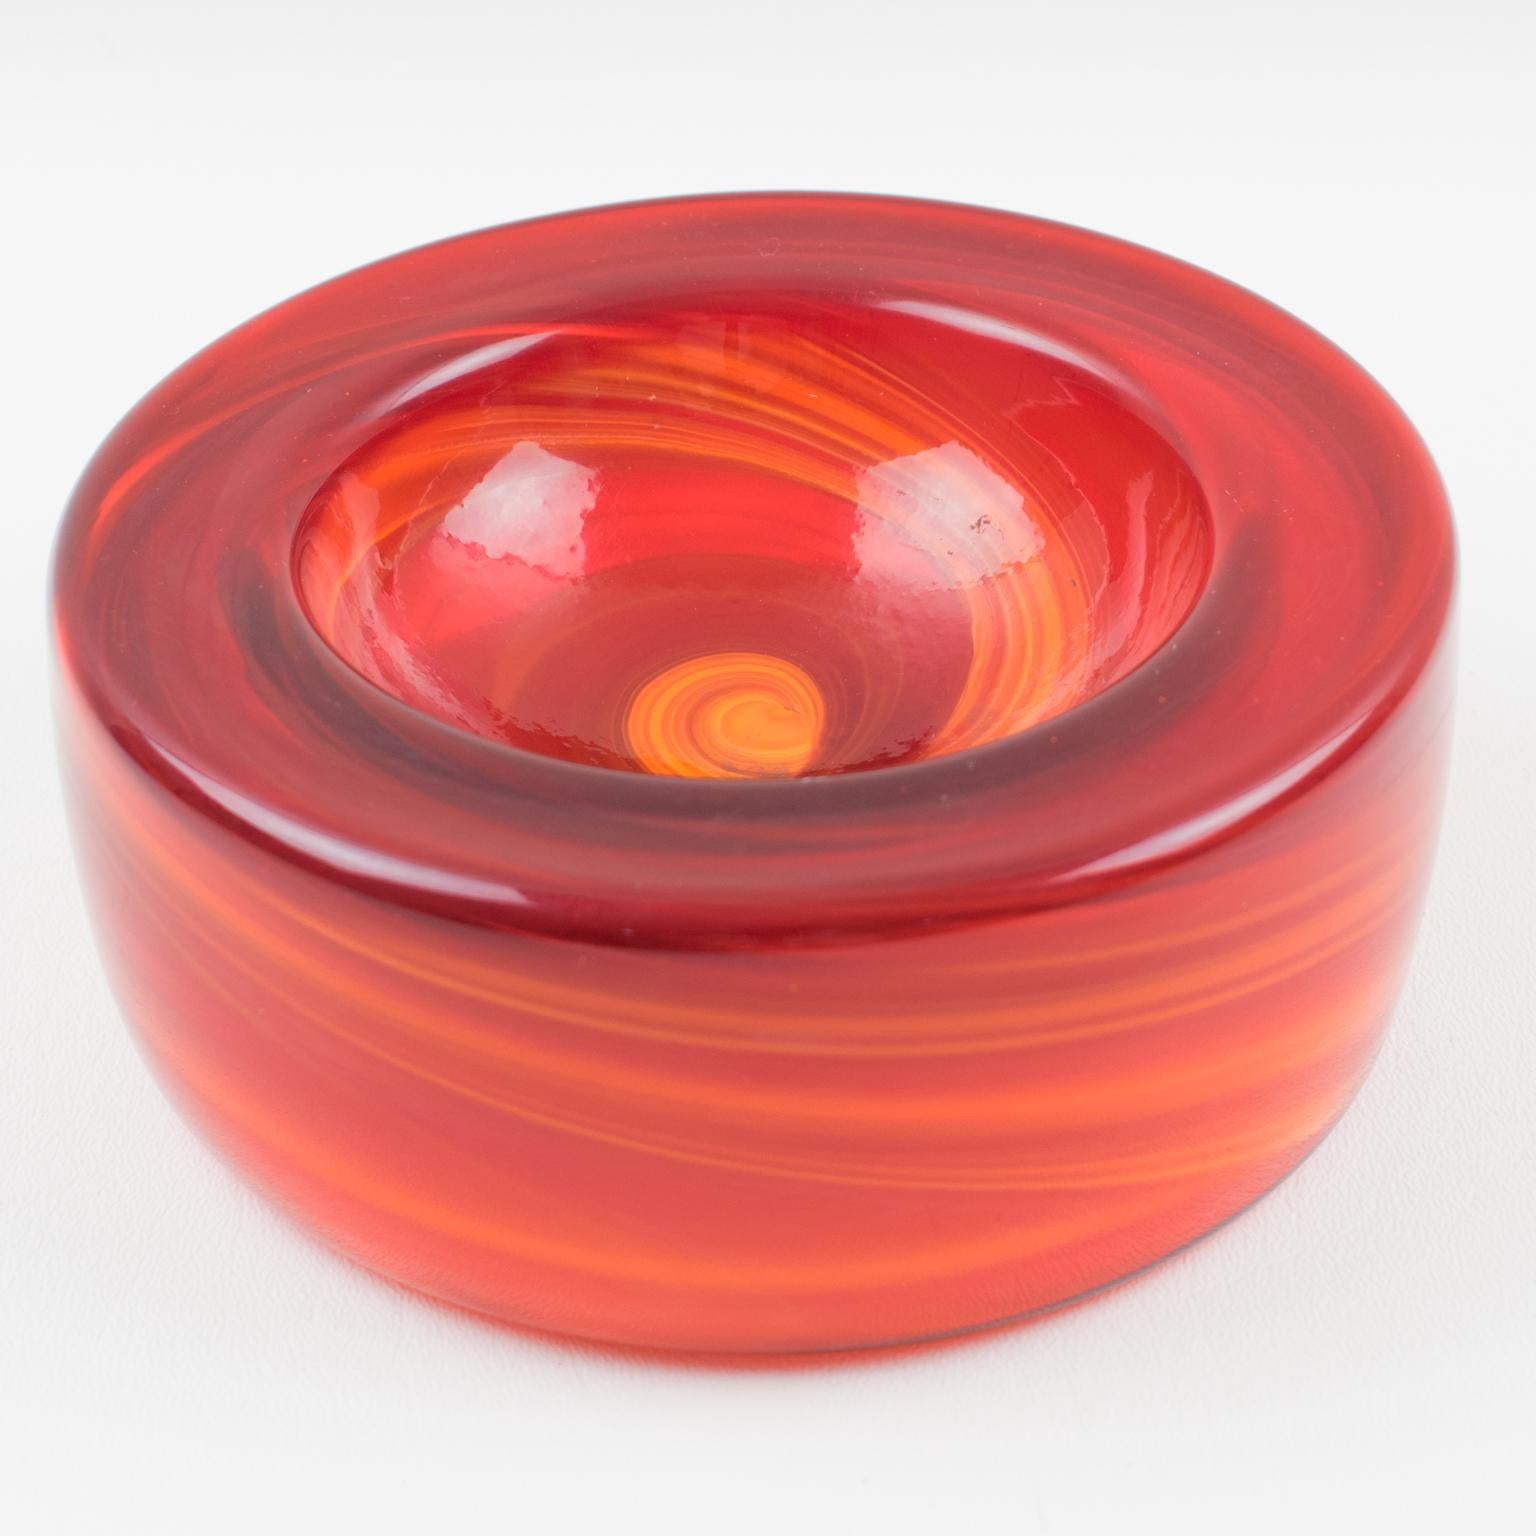 Stunning large midcentury blown glass cigar ashtray or desk tidy or vide poche designed and manufactured by Verreries de Masnieres, France. Extra thick handmade swirl glass, rounded shape with lovely orange and red mixed colors. Company logo